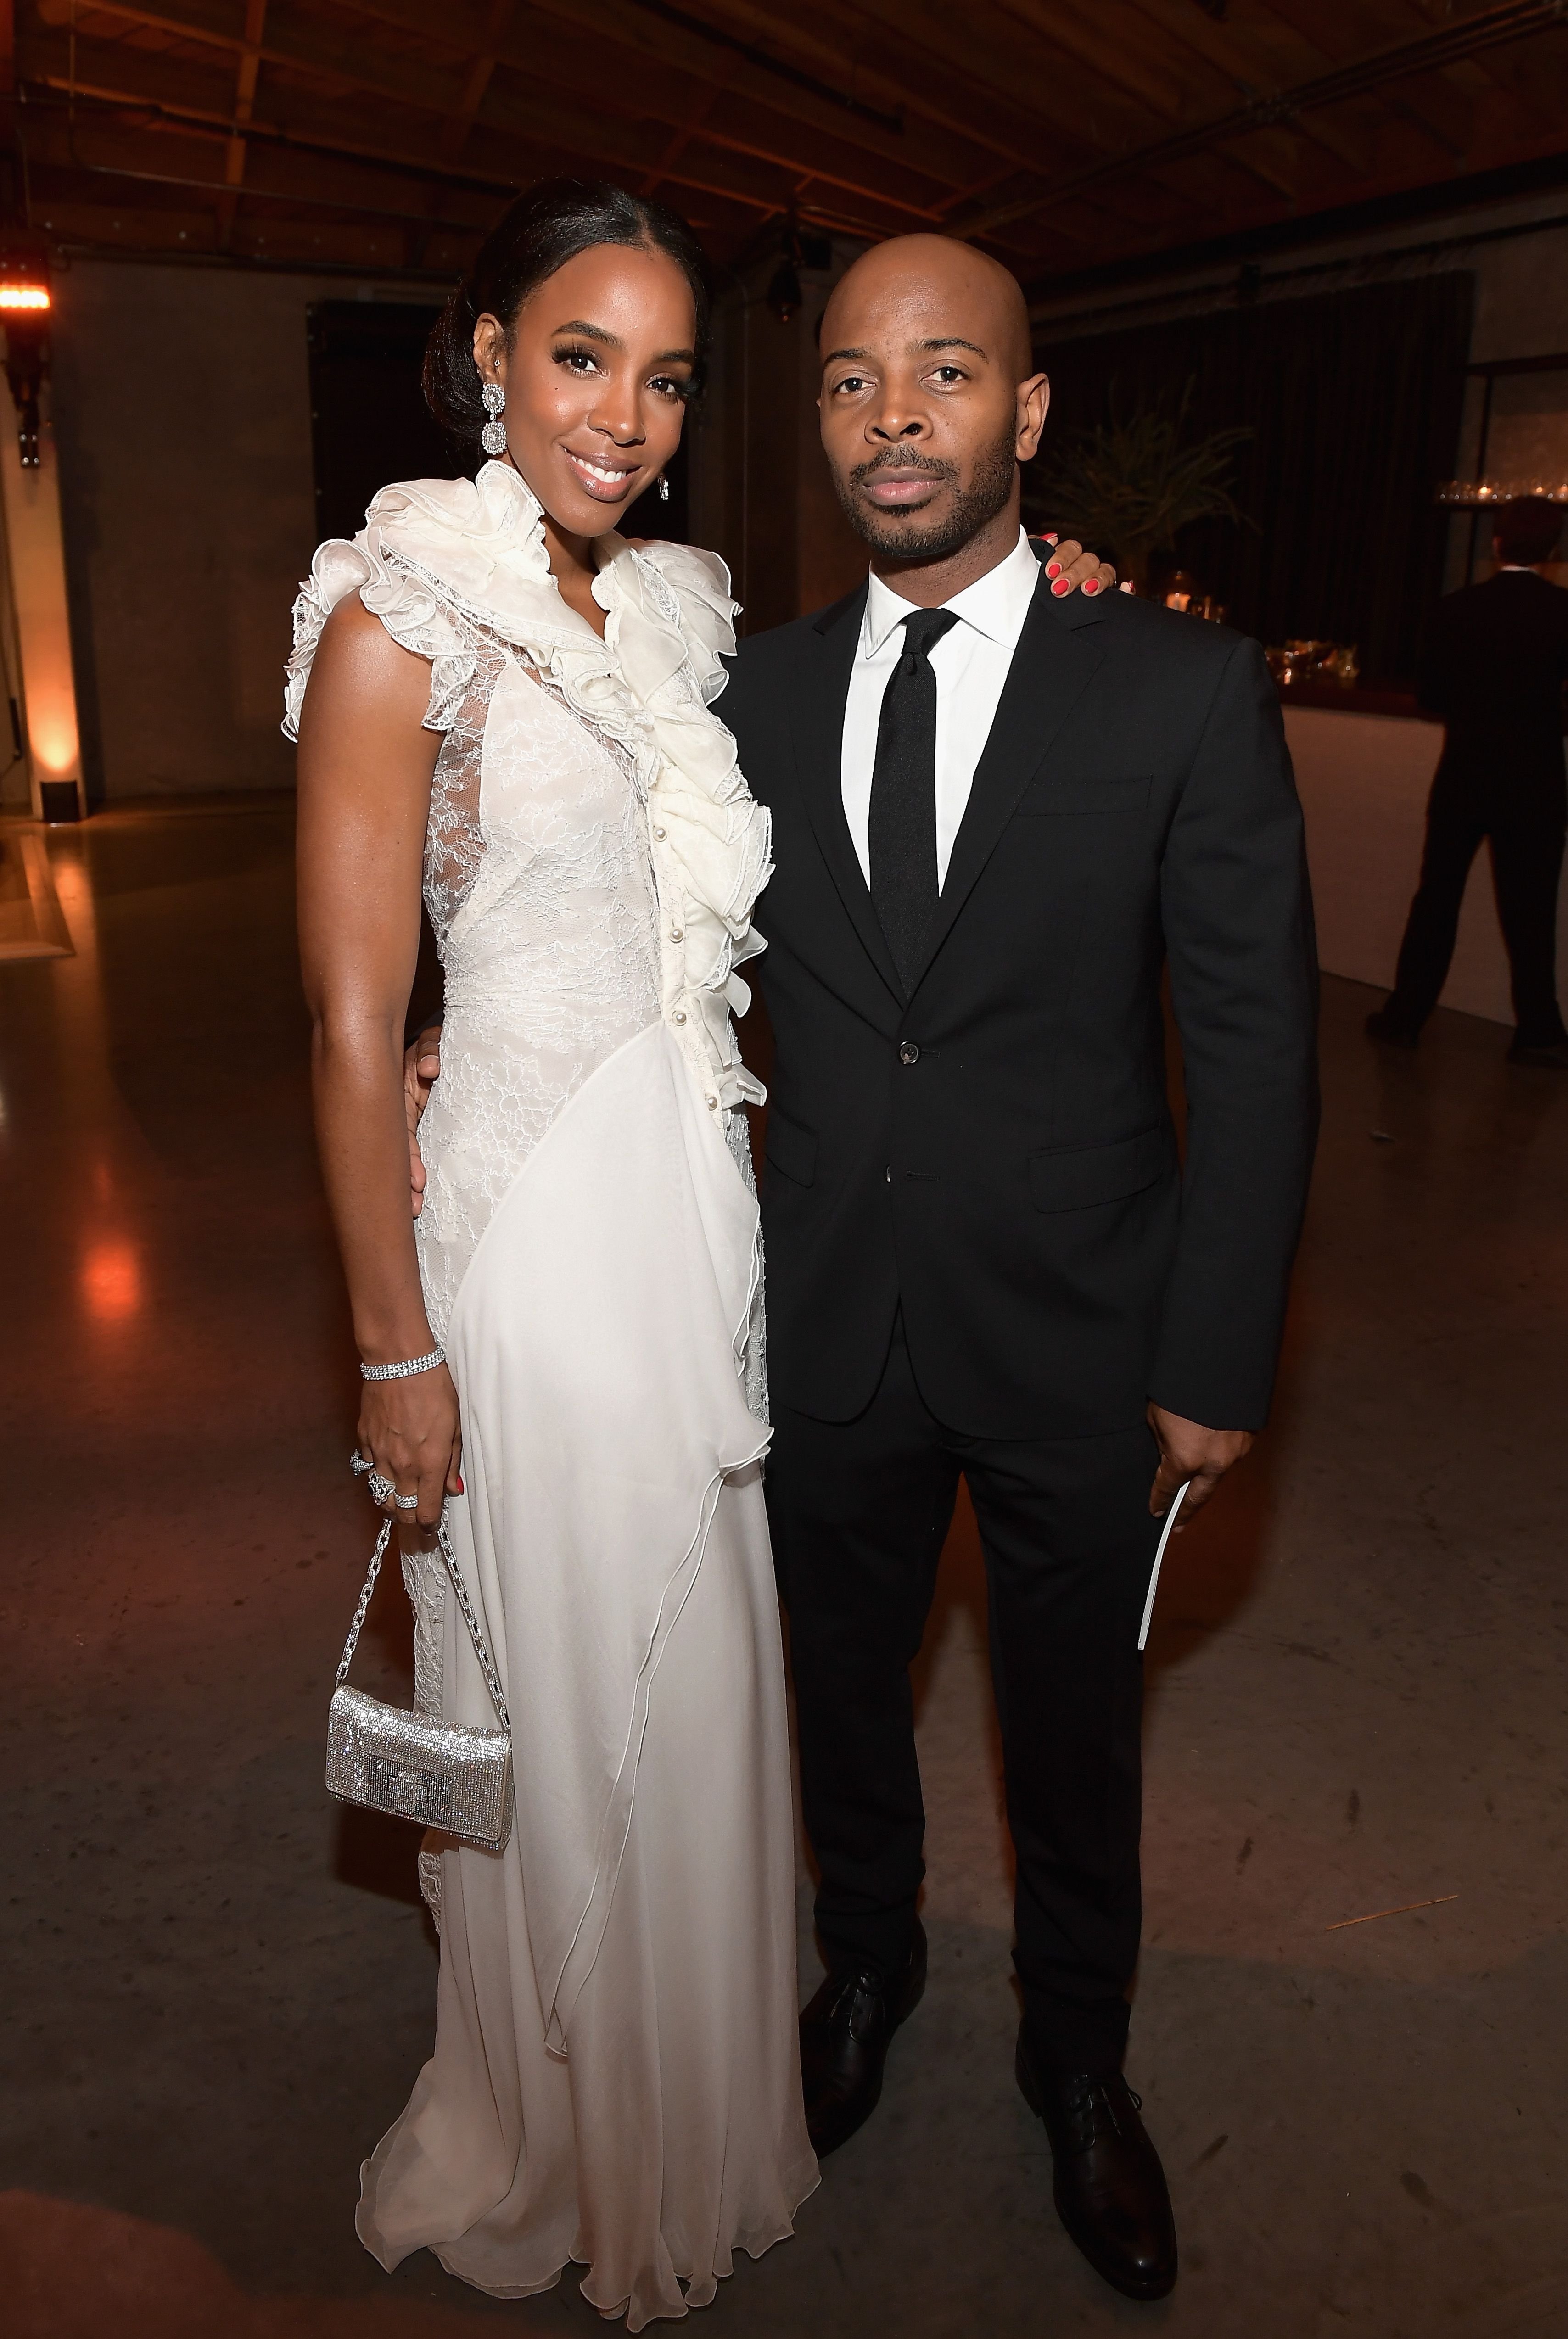 Kelly Rowland with husband Tim Weatherspoon at The 2017 Baby2Baby Gala presented by Paul Mitchell in Los Angeles, California | Photo: Matt Winkelmeyer/Getty Images for Baby2Baby